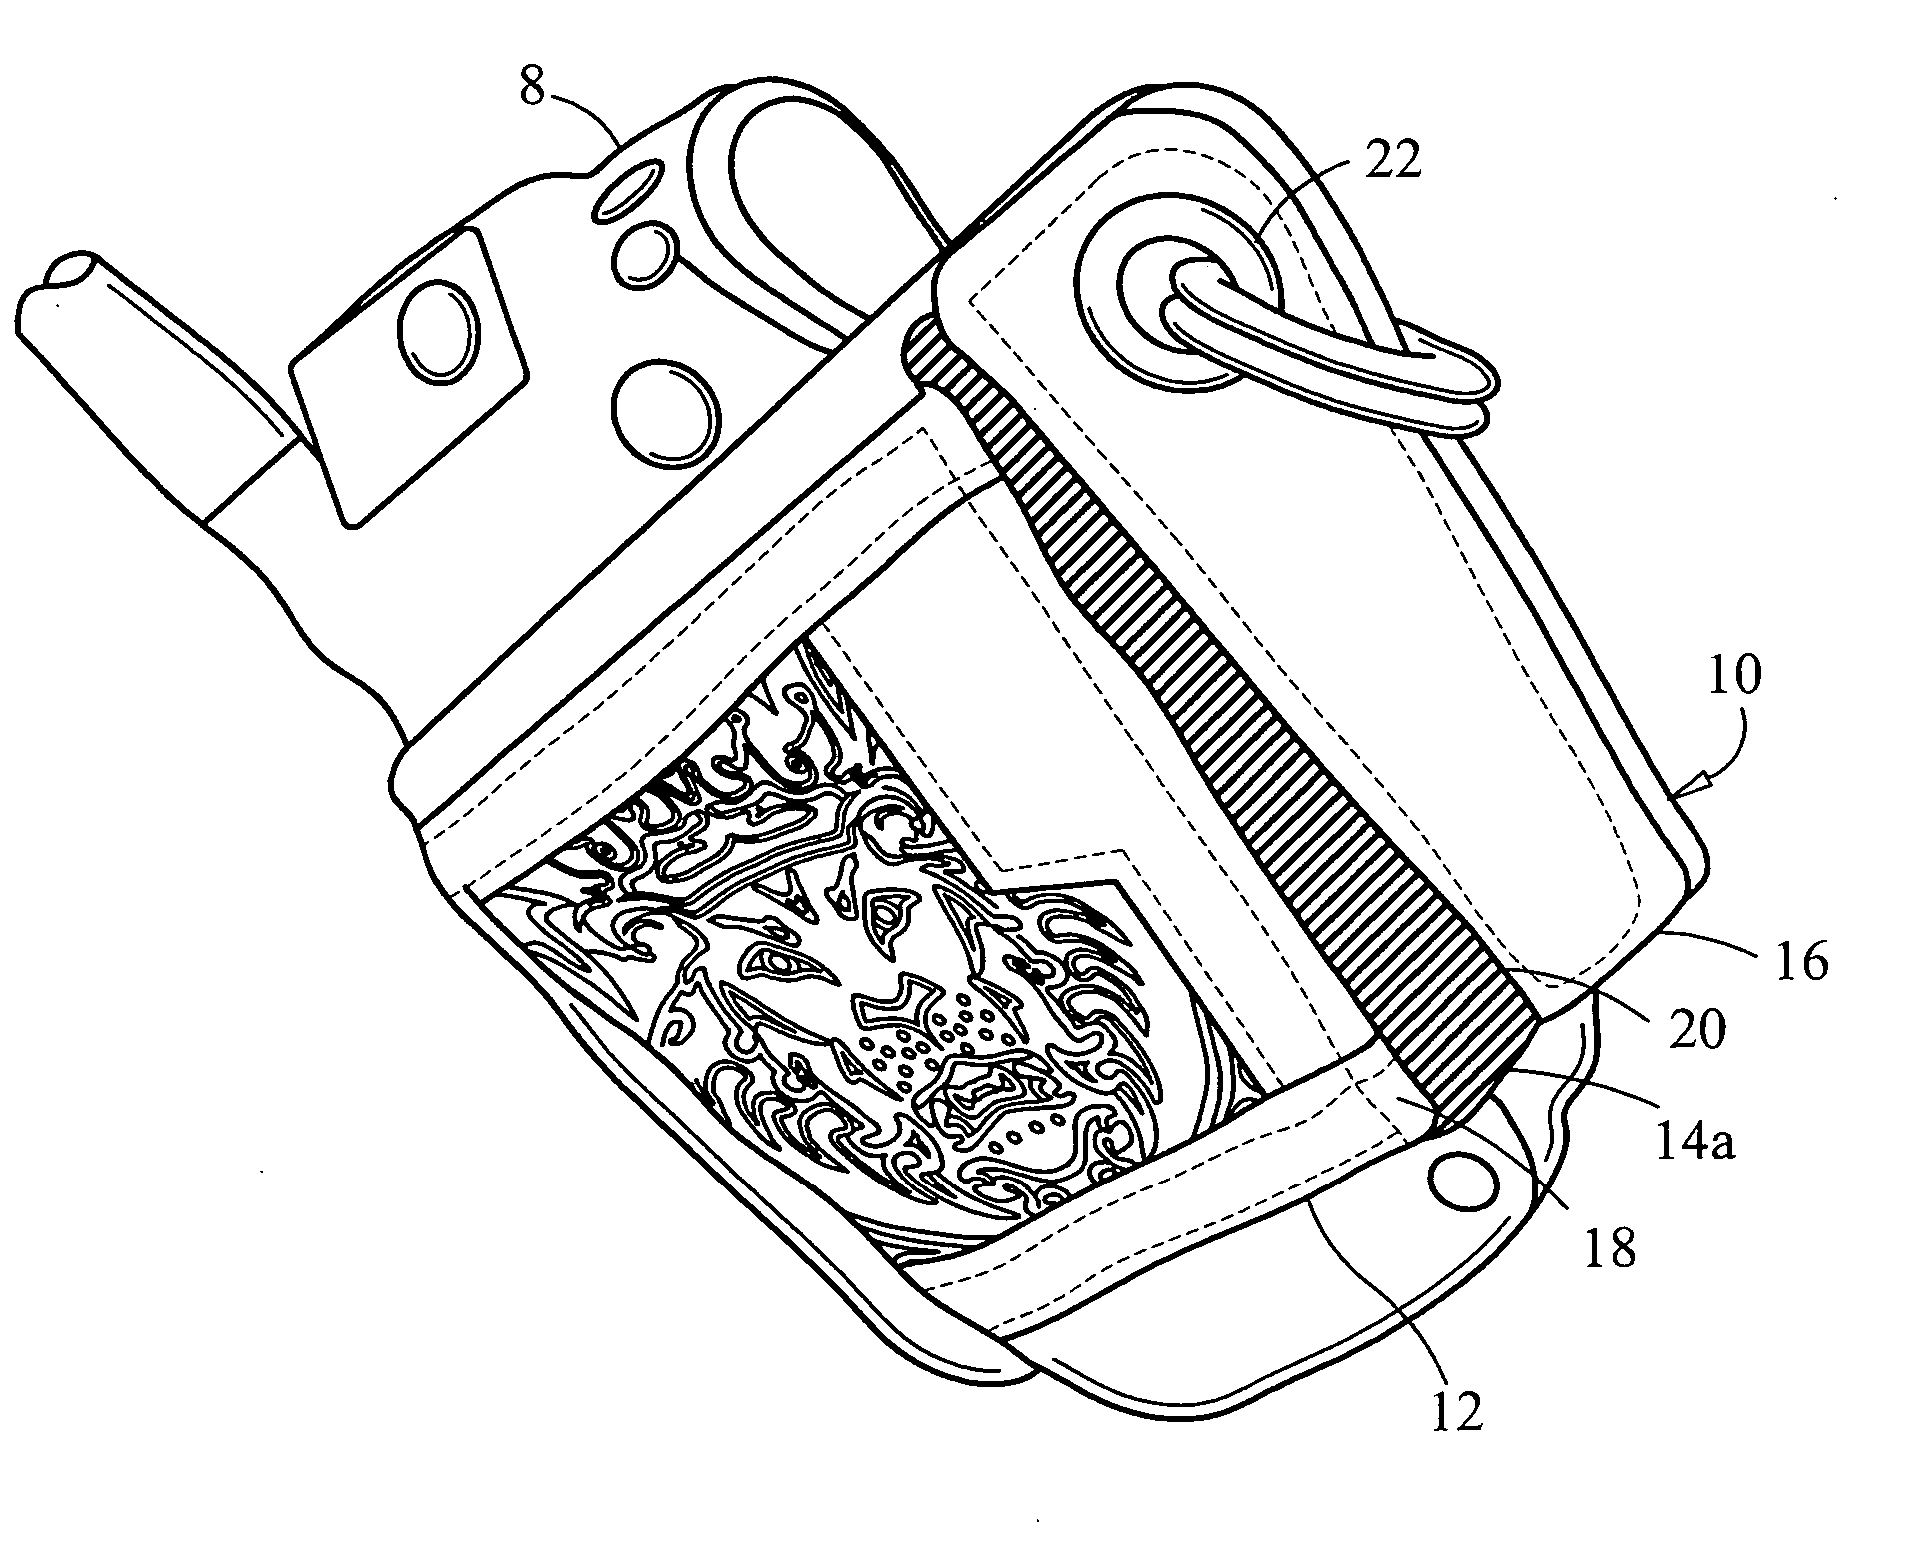 Wrap-around carrying case for cell phone or other personal electronic device